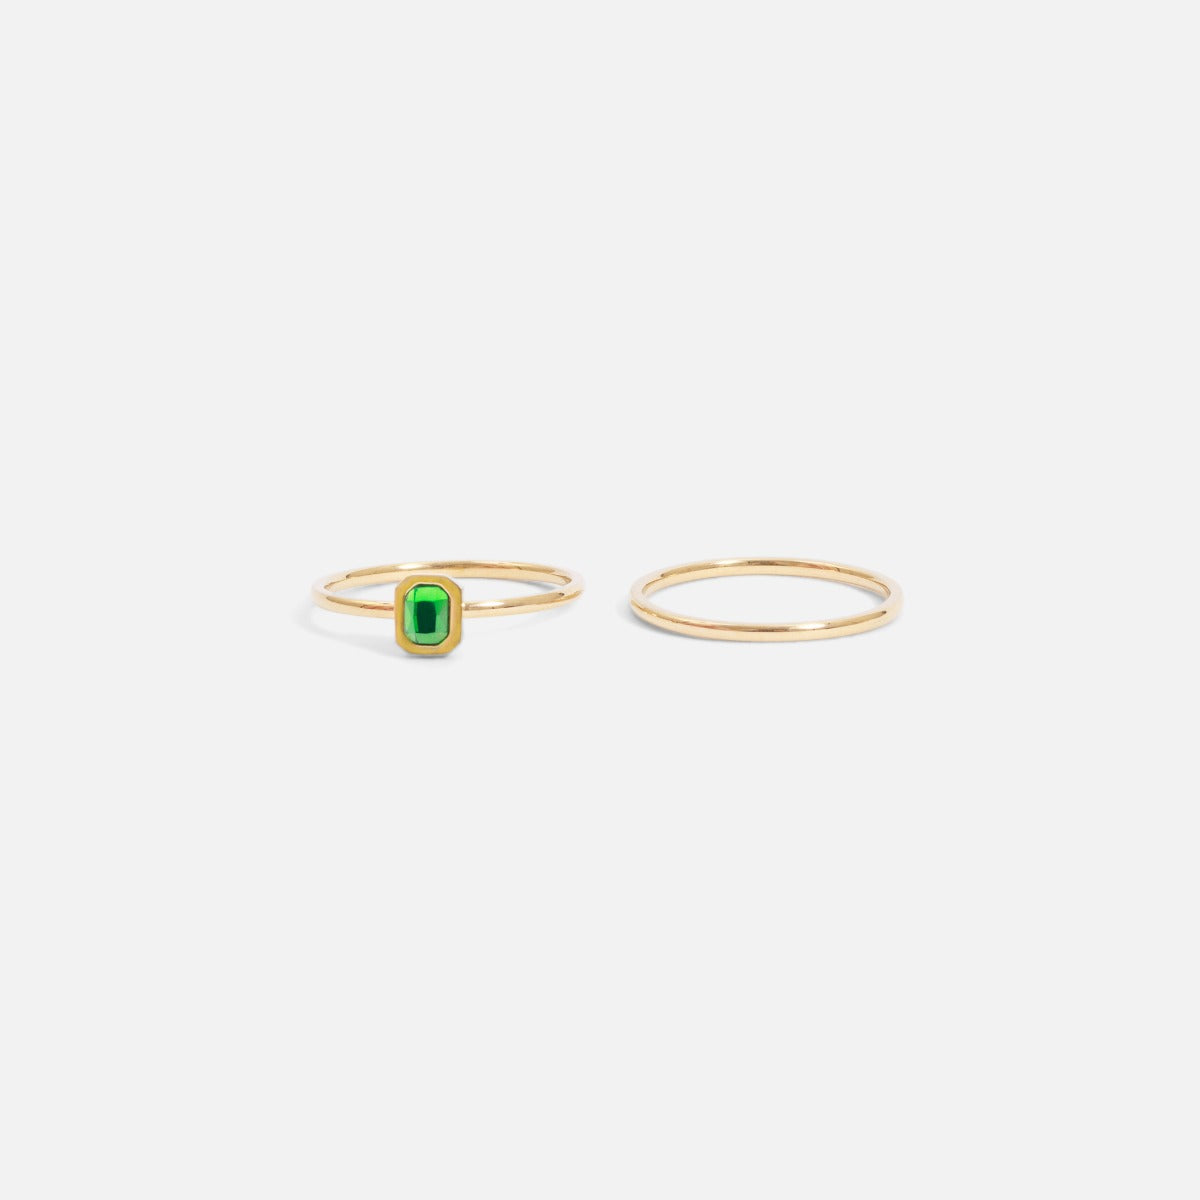 Set of two golden stainless steel rings with an emerald stone